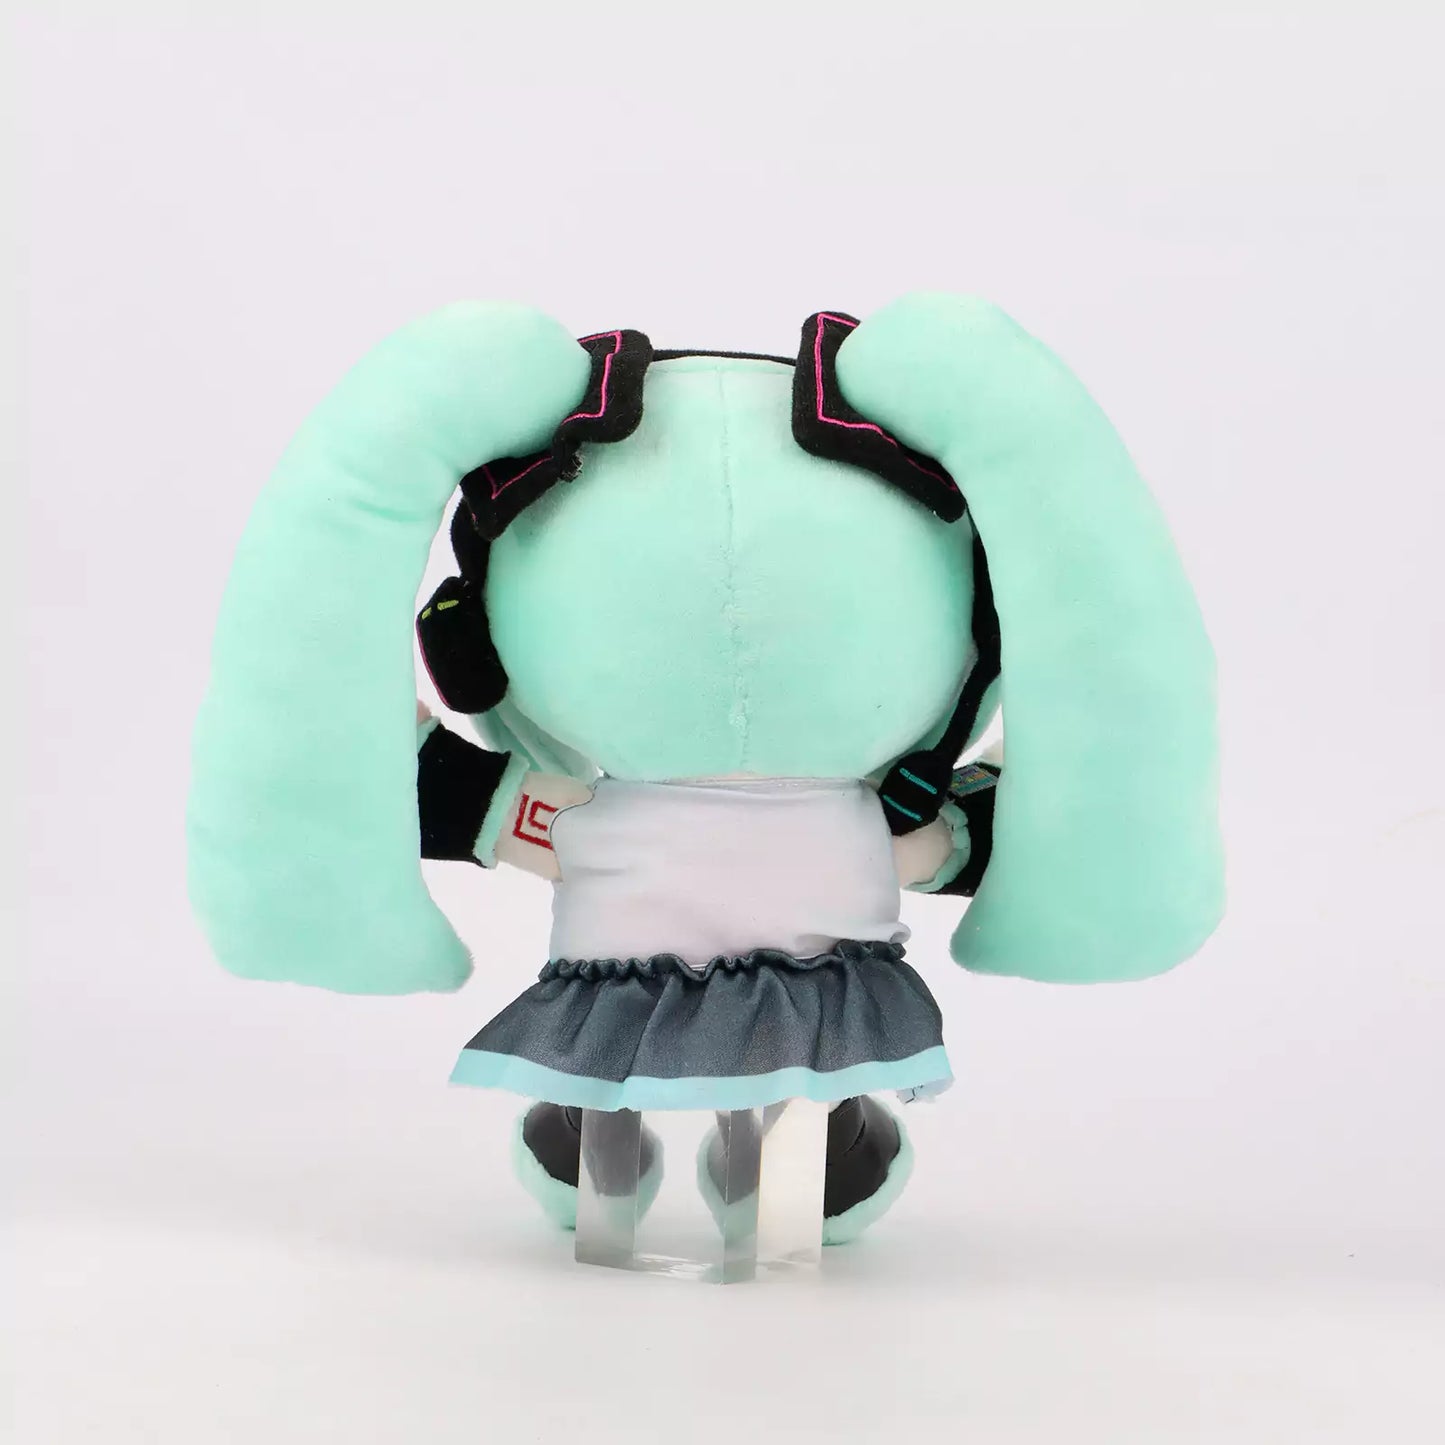 Hatsune Miku Plush Toy Gift for Game Fans